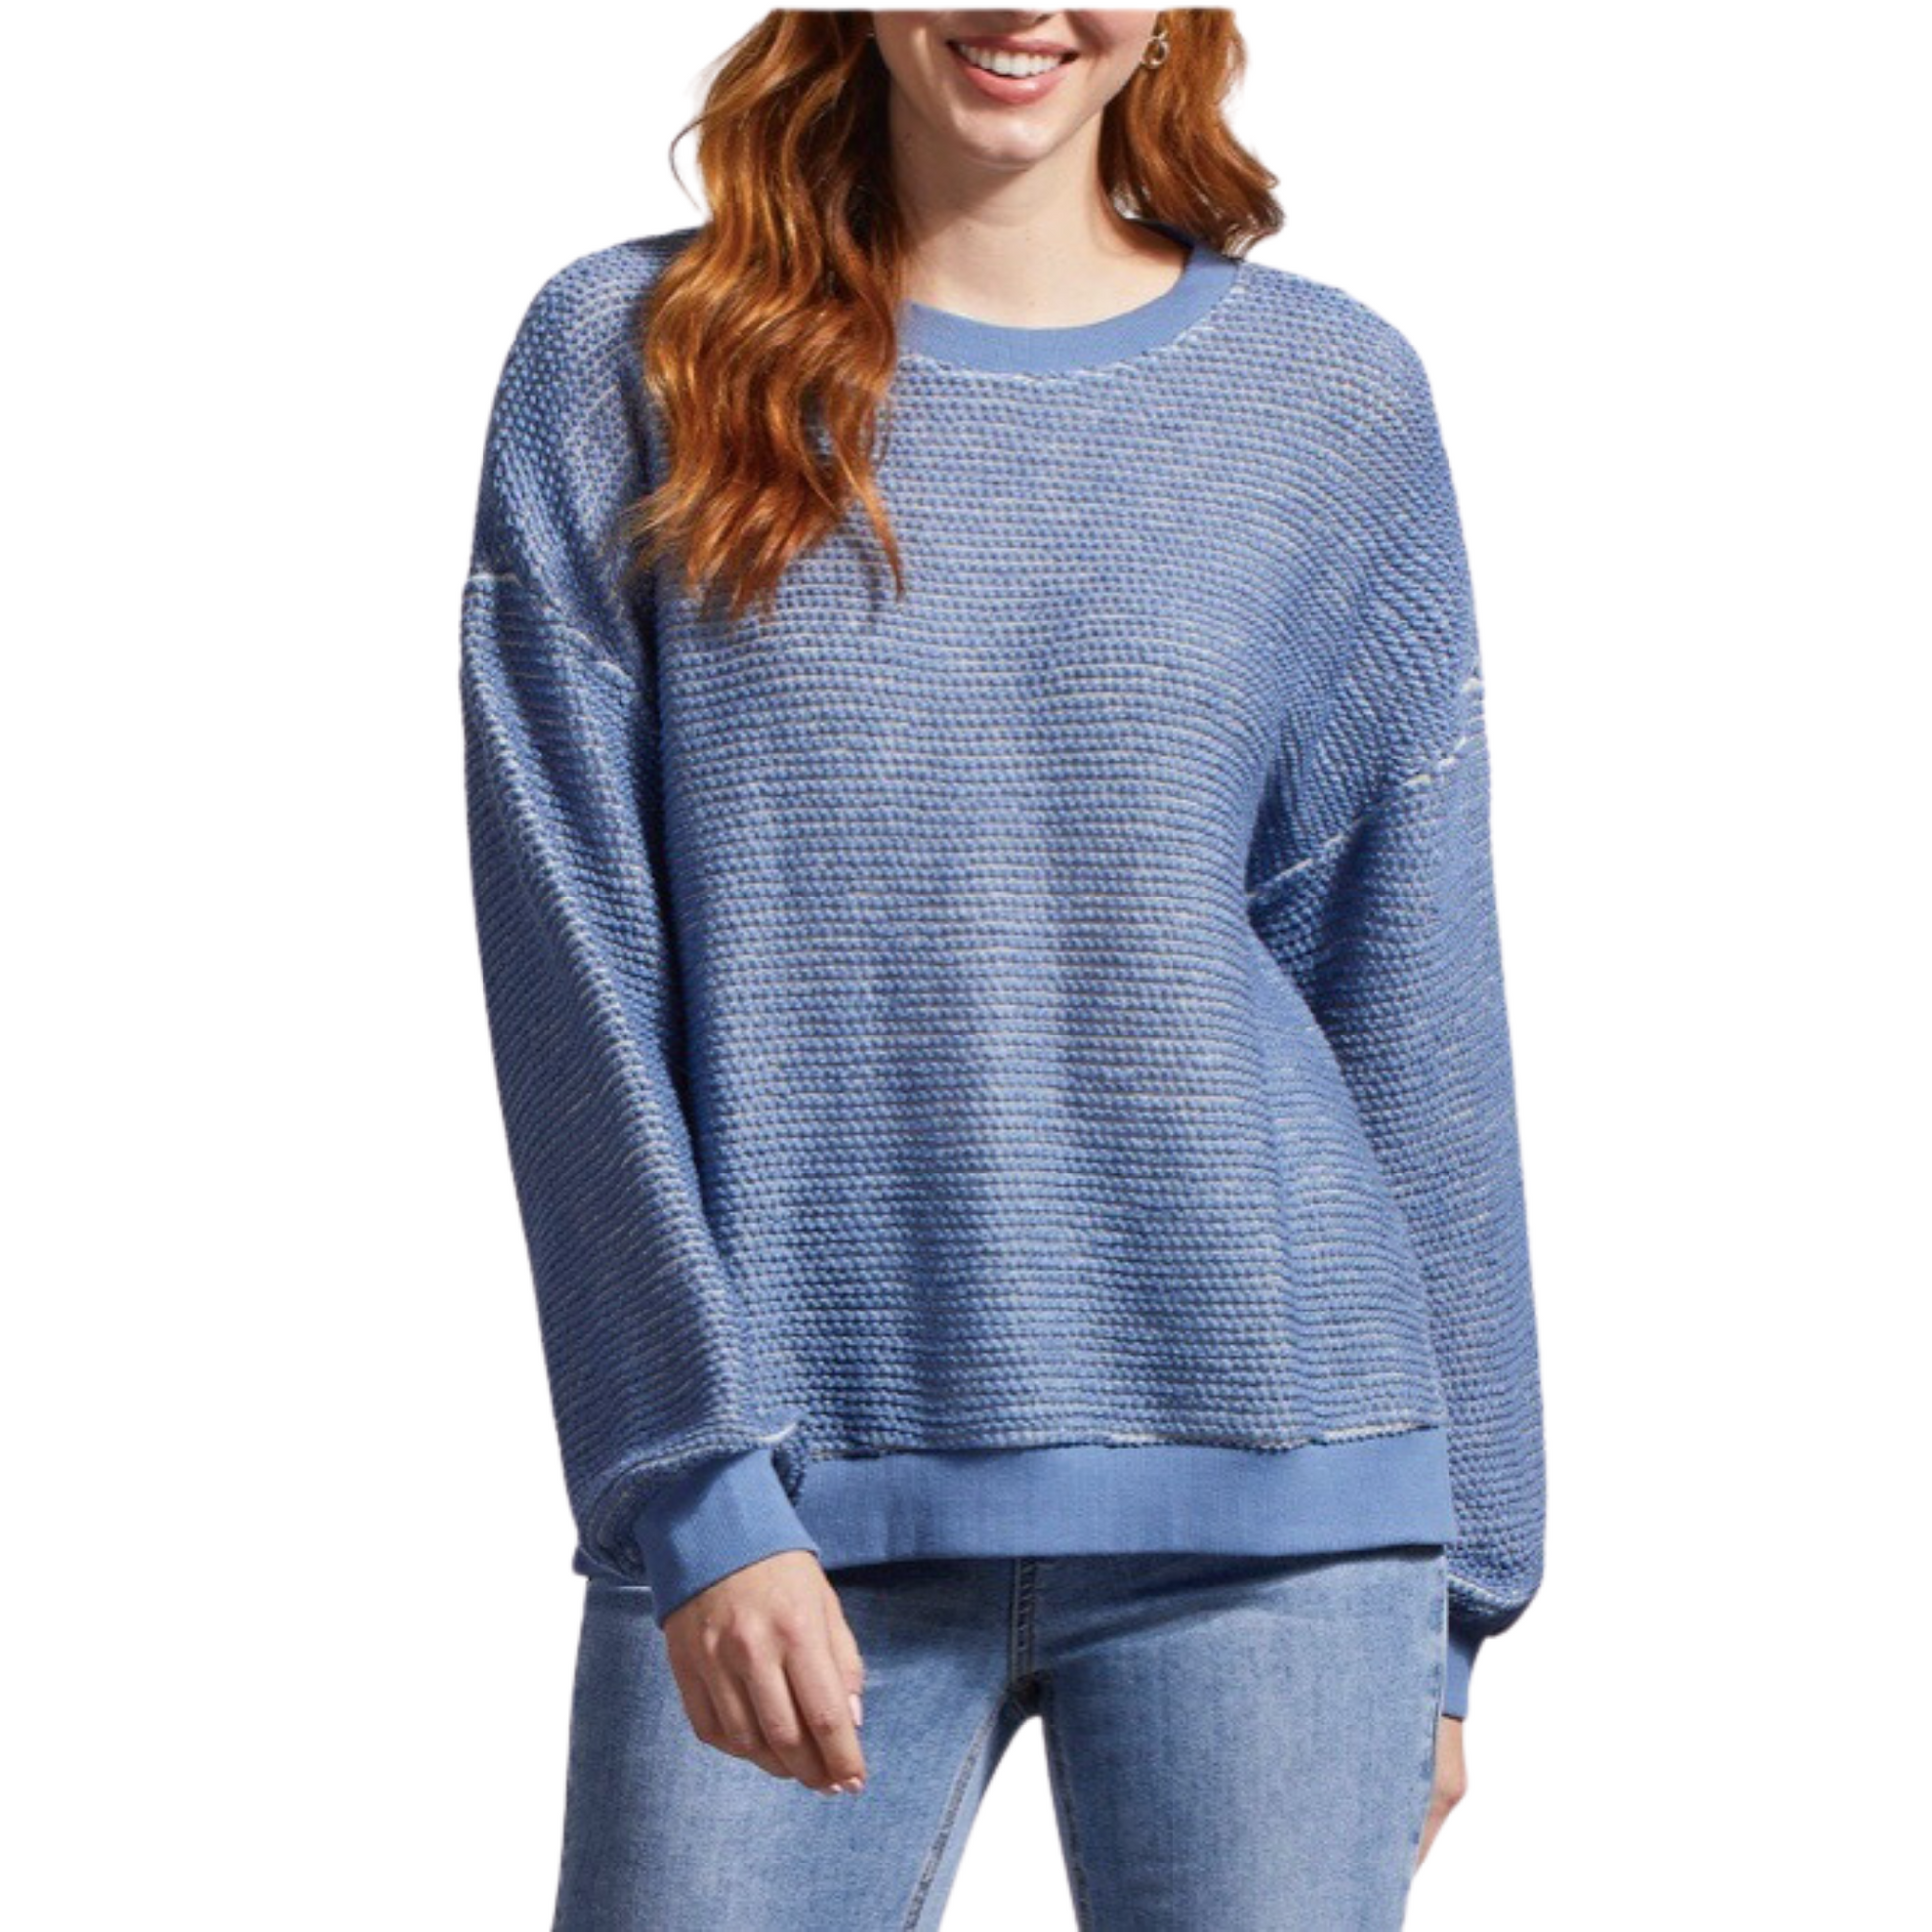 This stylish Wide Crew Neck Tunic from Tribal Brand is made from soft knit fabric with a denim blue hue. The tunic's long sleeve design offers comfort and warmth. Perfect for everyday wear, this tunic is sure to become one of your favorite pieces.